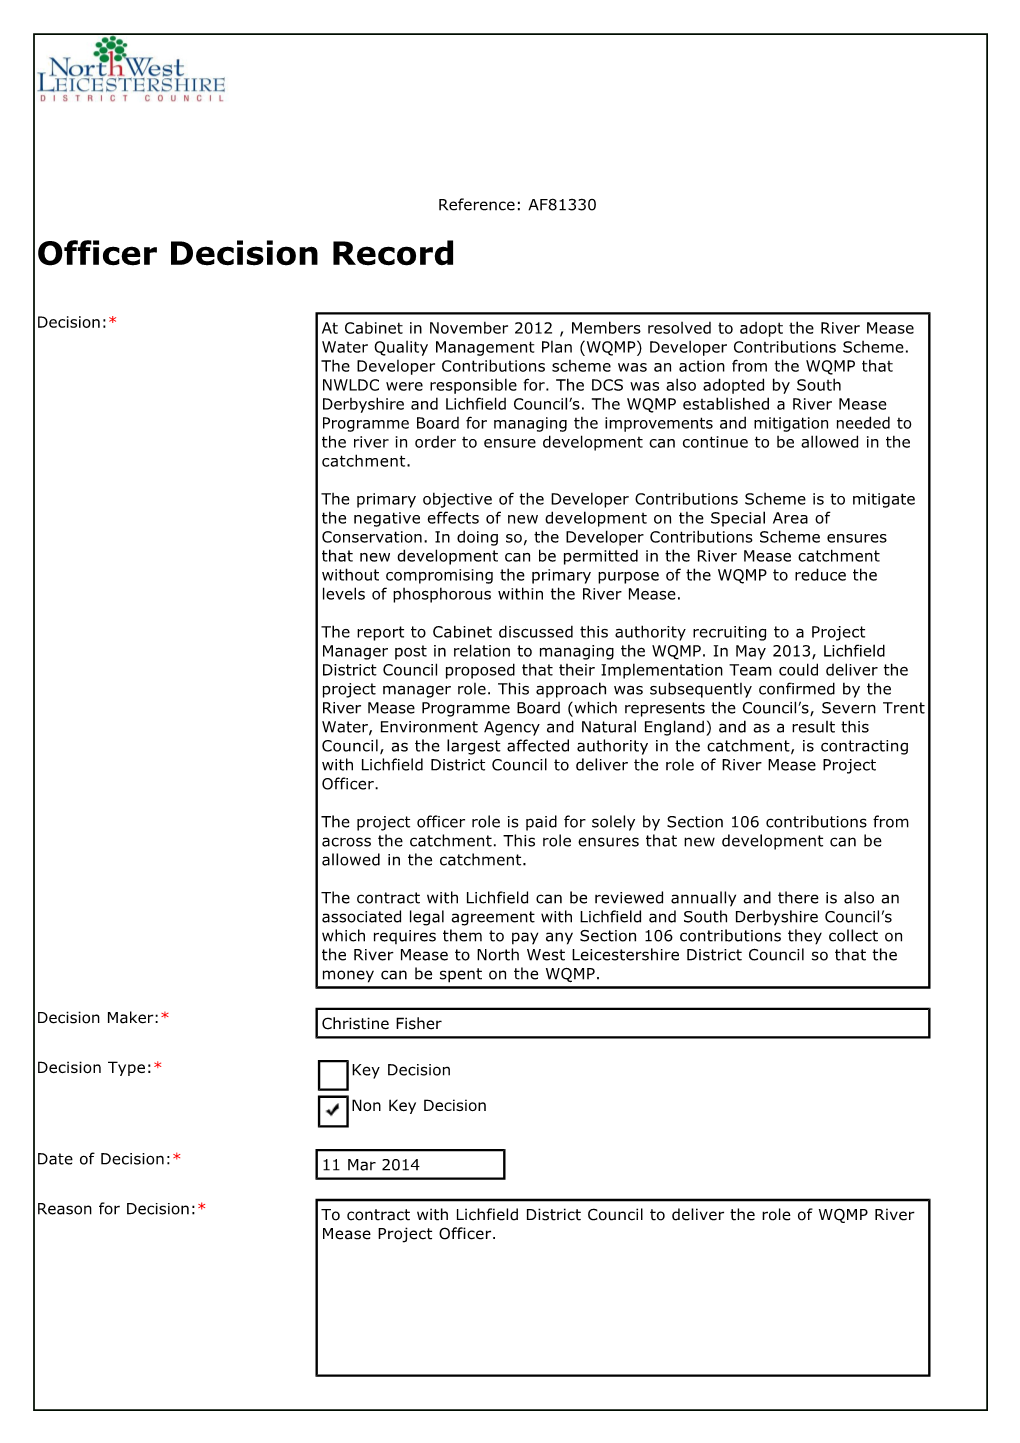 Officer Decision Record